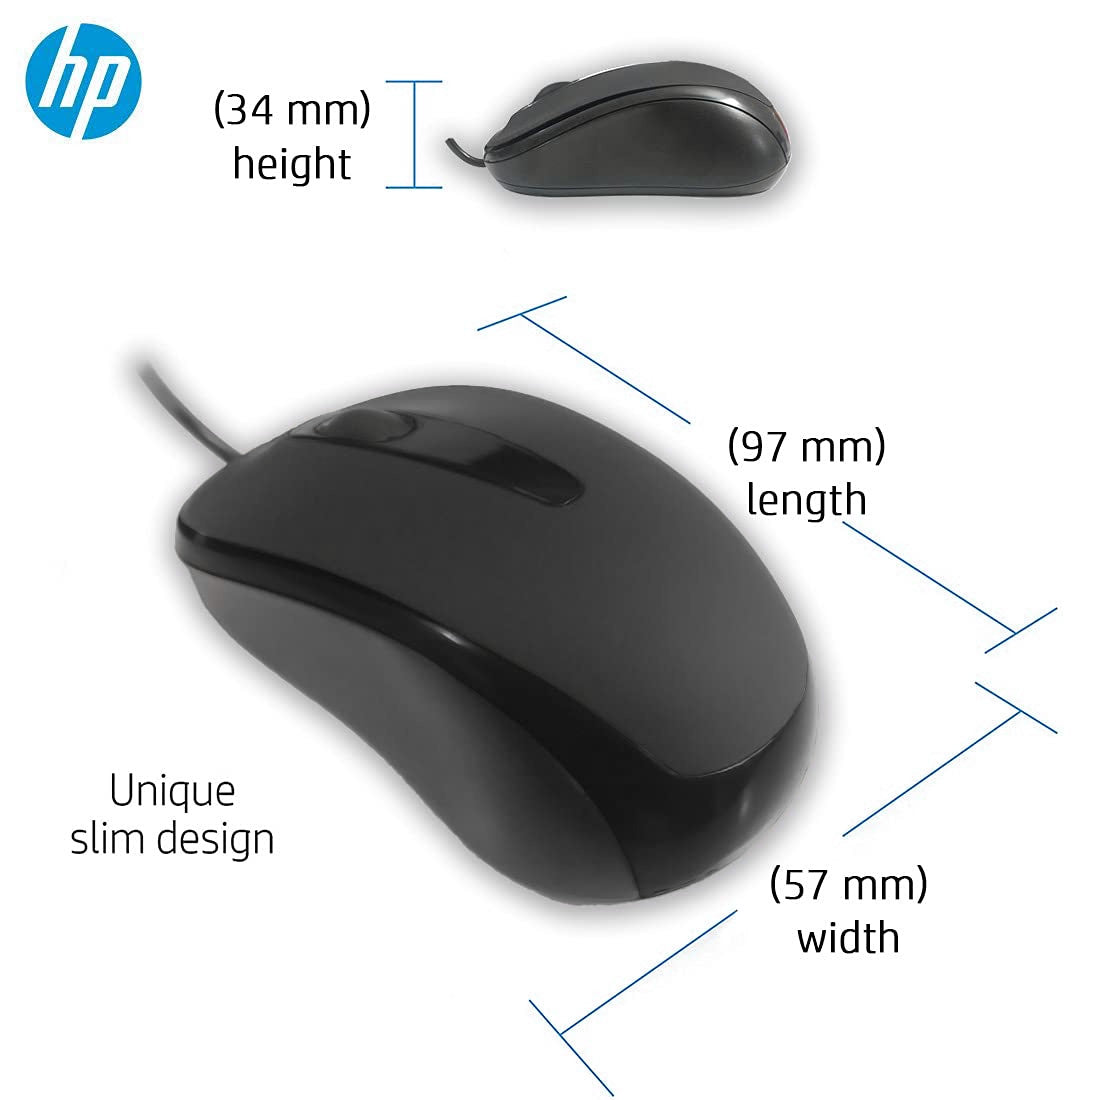 [RePacked] HP M006 Wired USB Optical Mouse with 1200 DPI and 3 Buttons